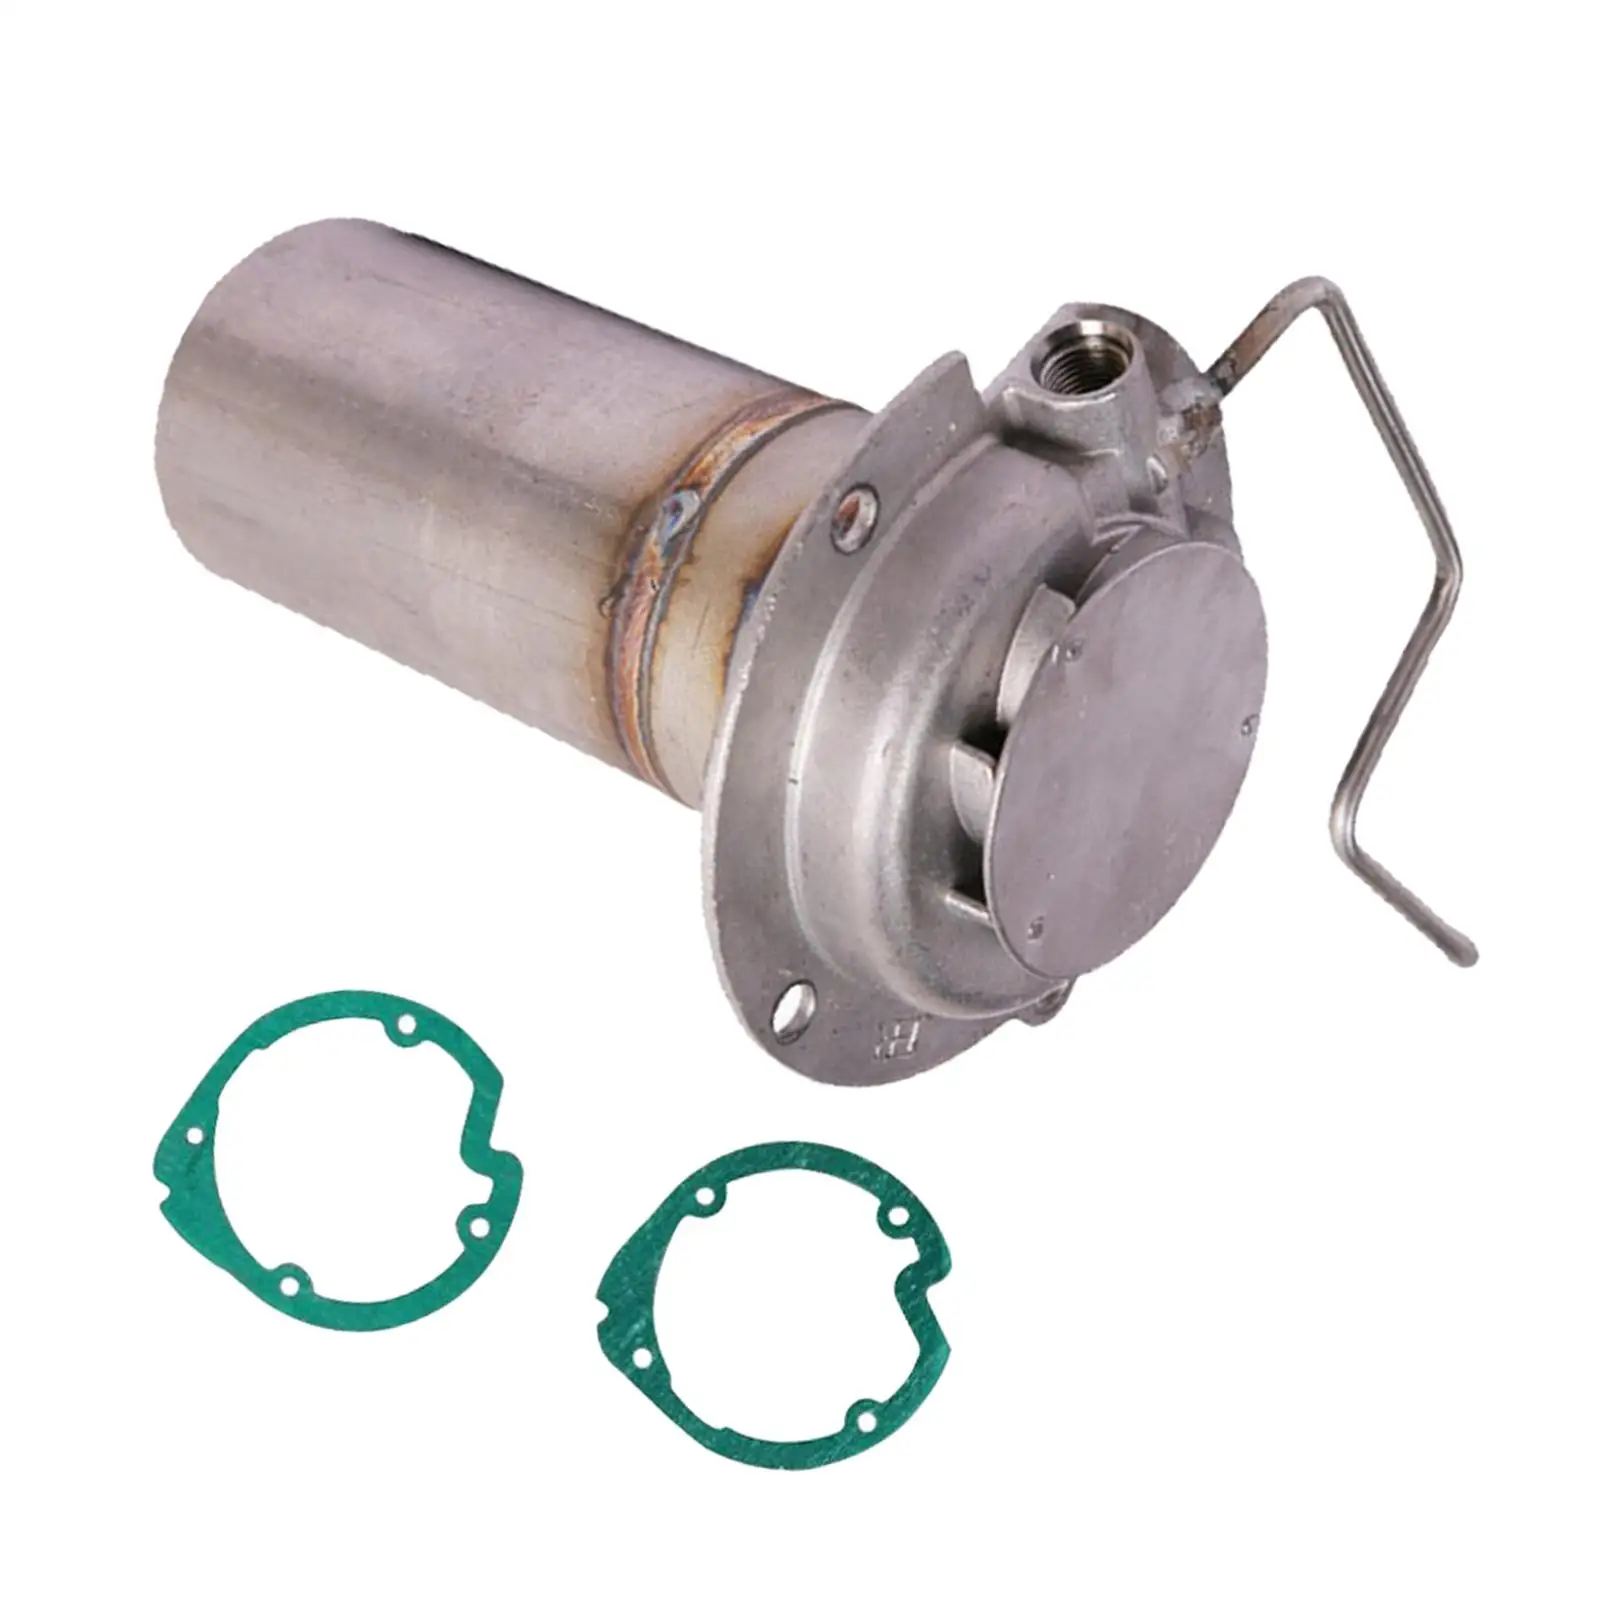 Automotive Combustion Chamber for Parking Heater Easily Install Quiet